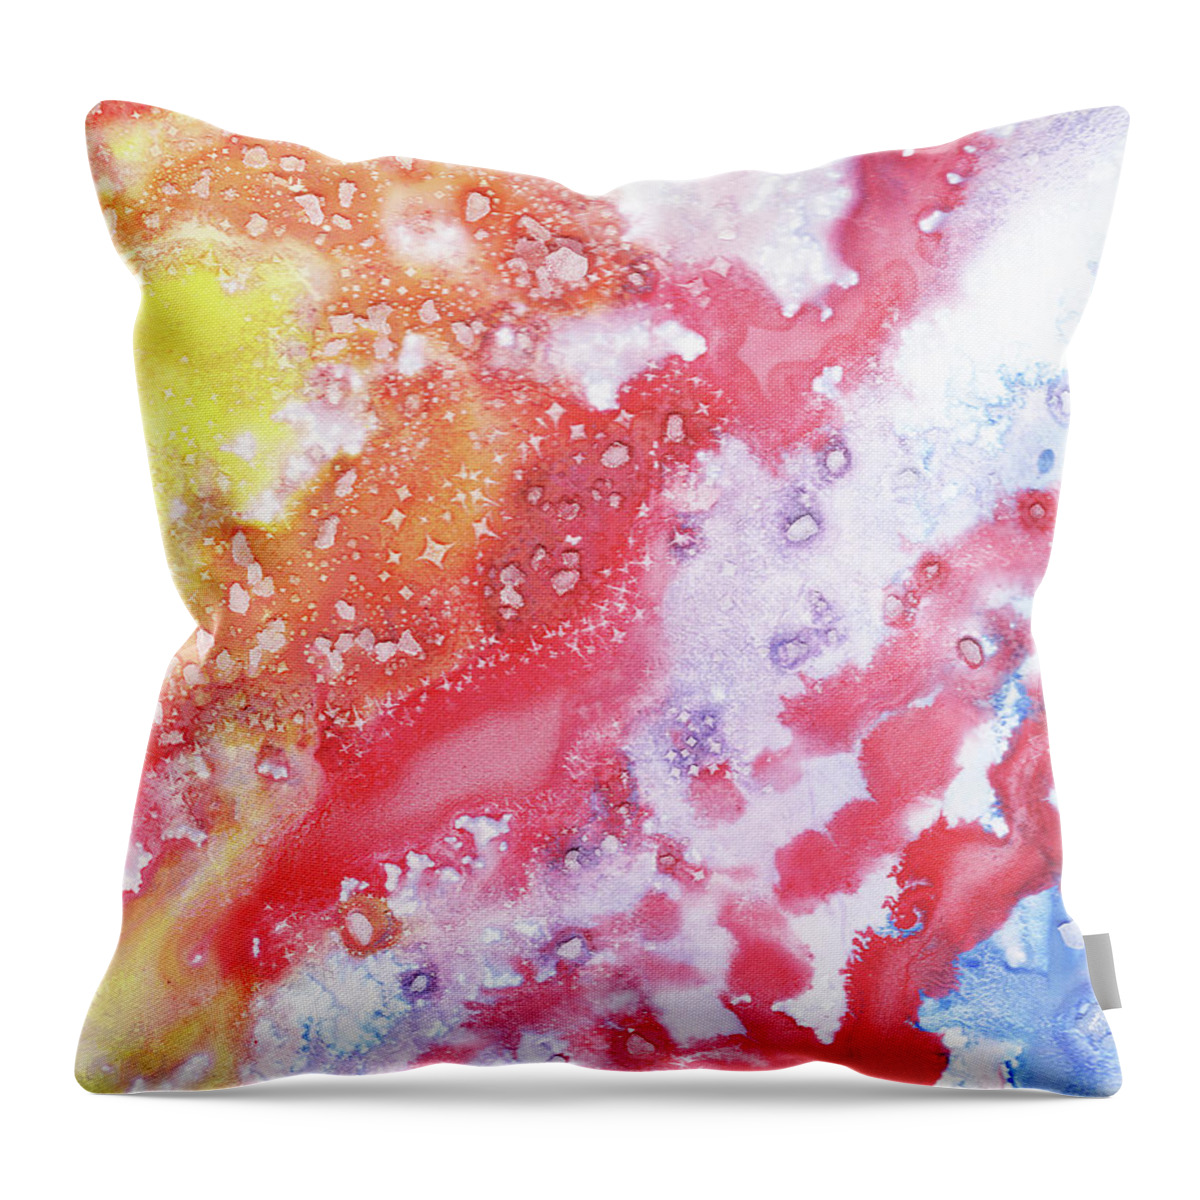 Abstract Throw Pillow featuring the painting Synergy Of Crystal And Abstract Watercolor Decorative Art VIII by Irina Sztukowski